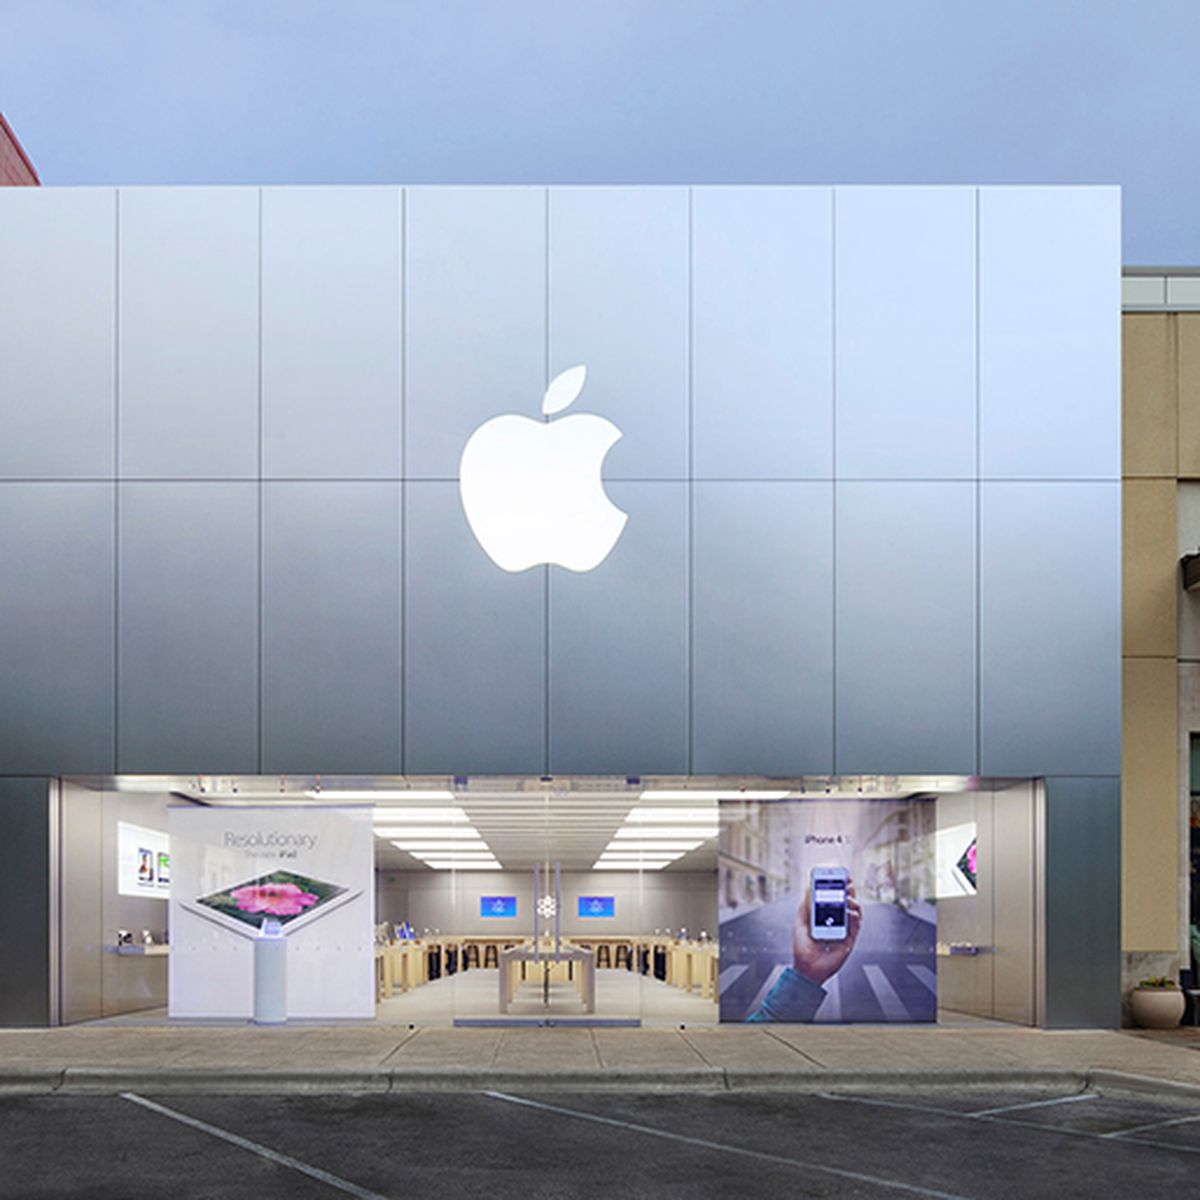 Apple Opening New Store at Domain Northside in Austin This Weekend